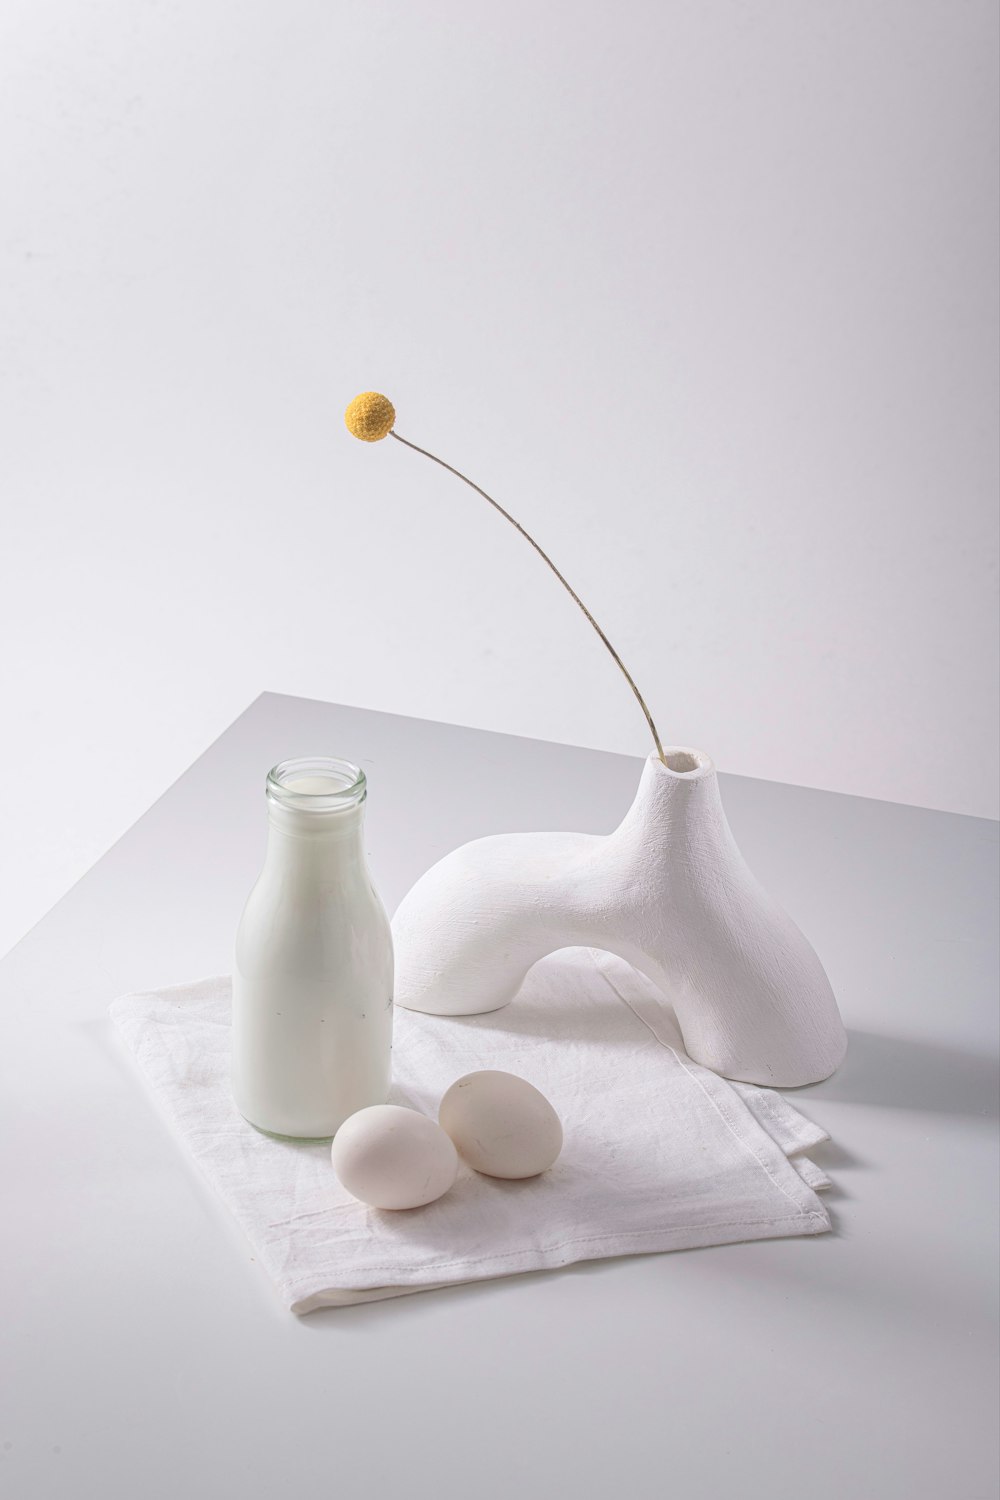 a vase with a flower and two eggs on a napkin